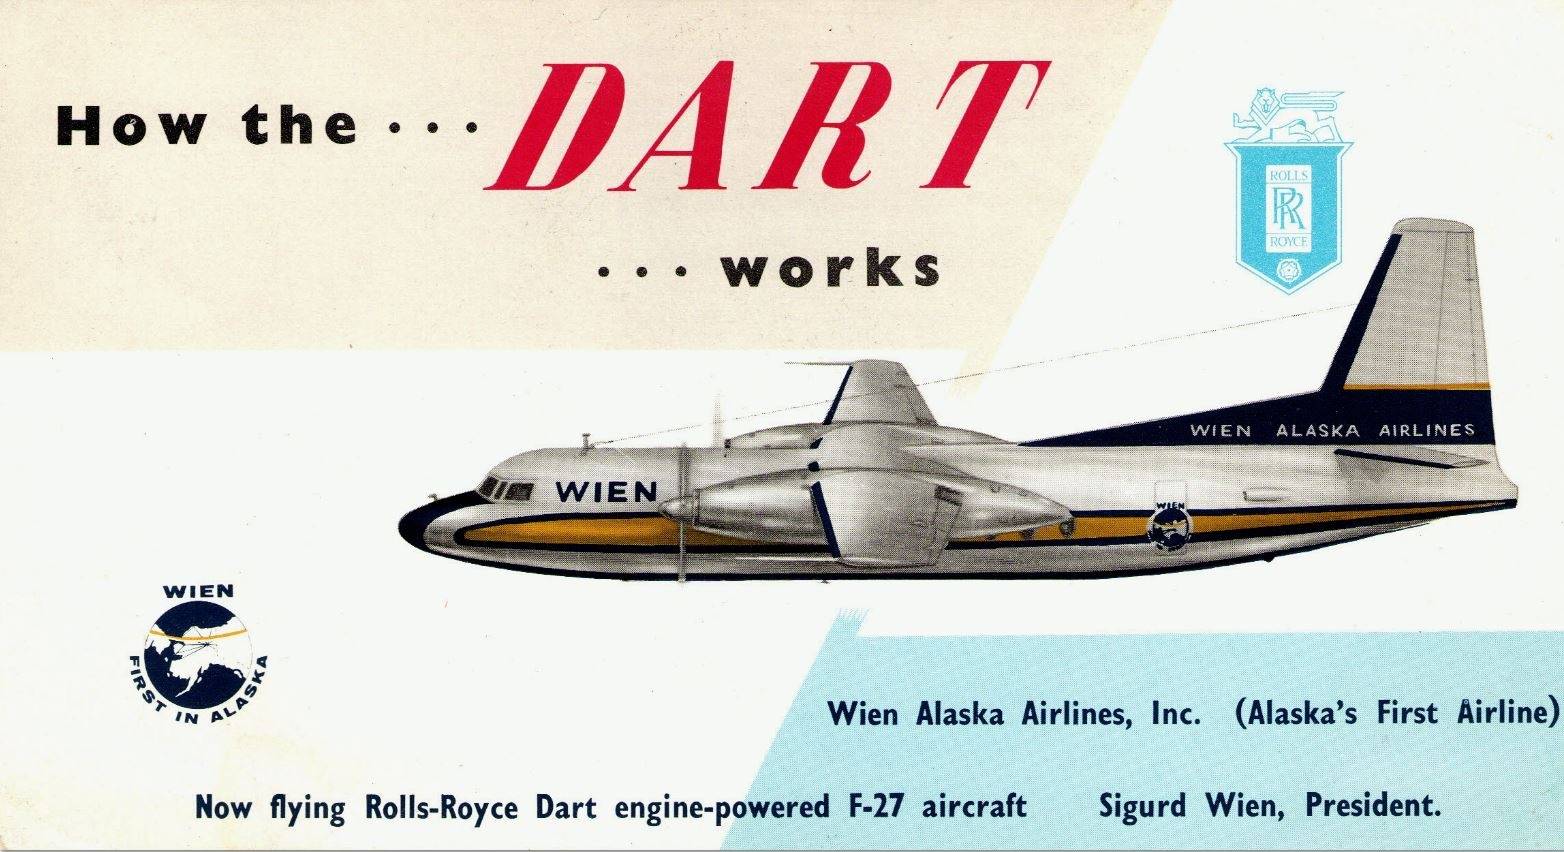 How the Dart works with a Rolls-Royce engine - it flies! | For A Bodies